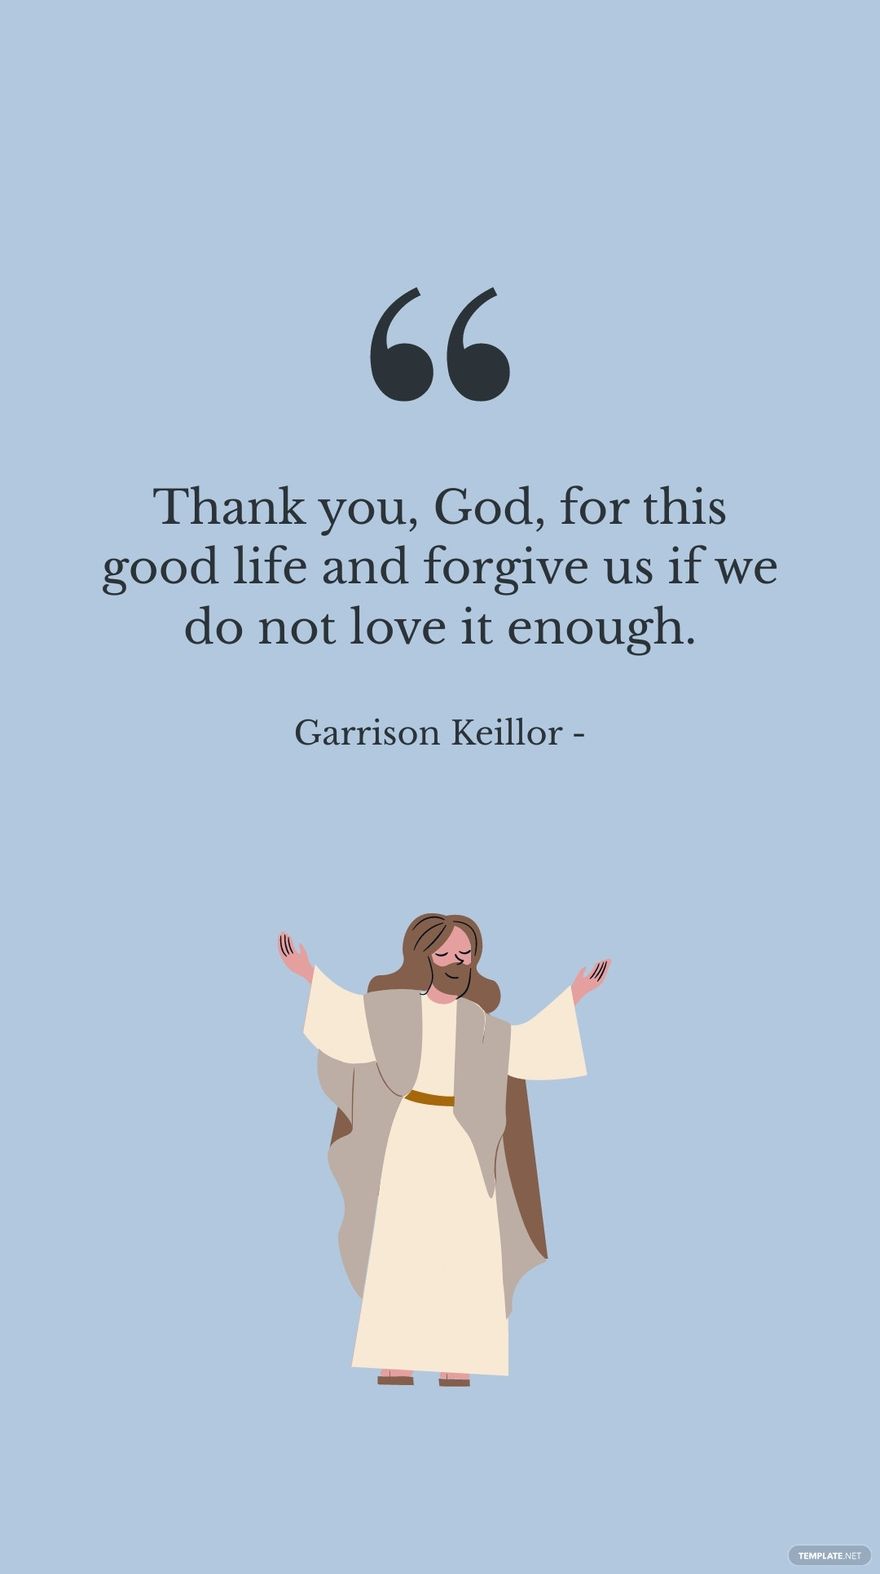 Garrison Keillor - Thank you, God, for this good life and forgive us if we do not love it enough. in JPG